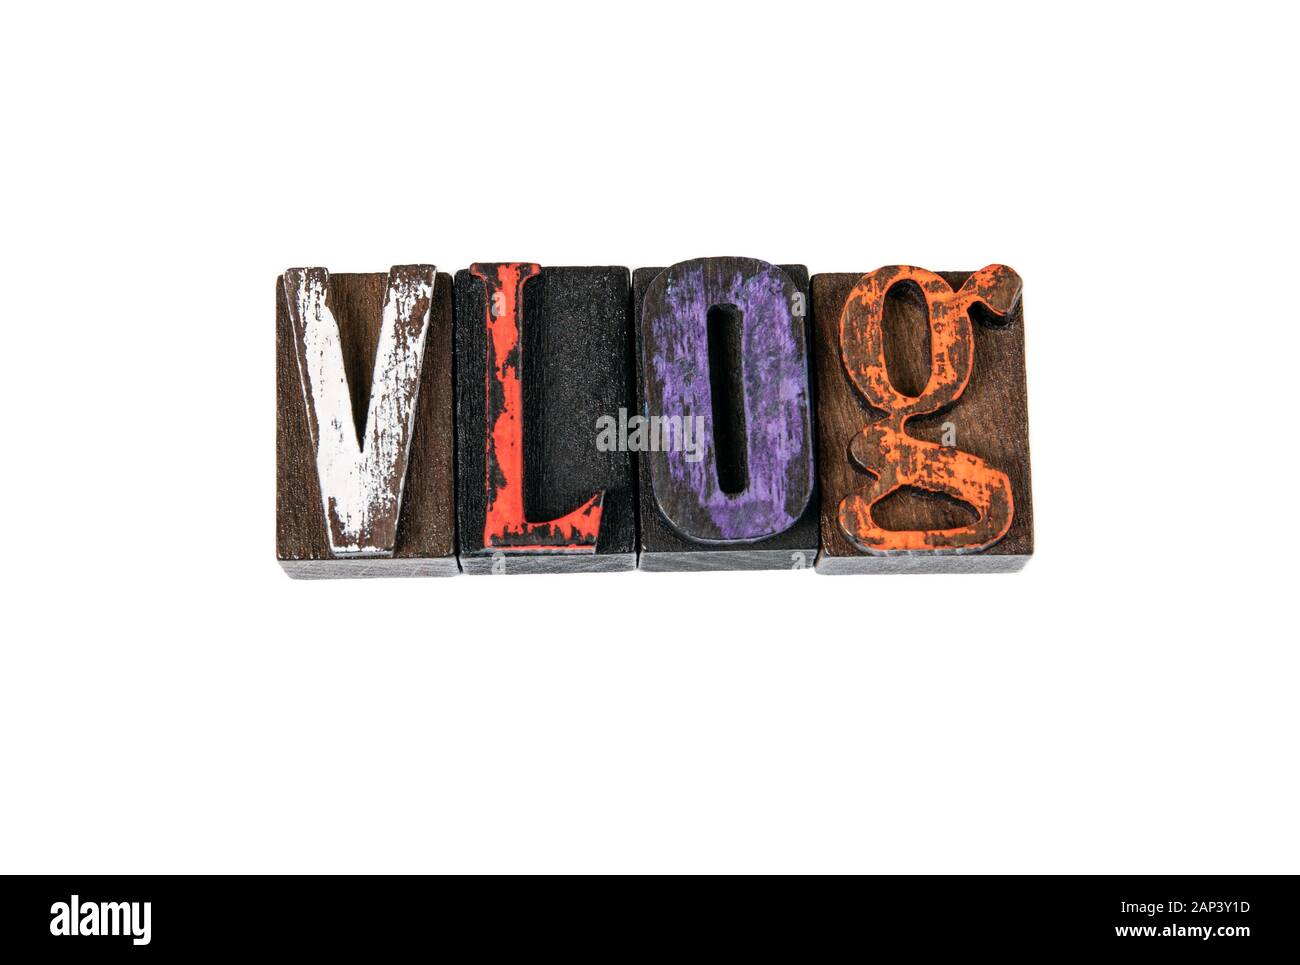 Vlog. Social media, popularity, influencers and marketing. Colored wooden letters on a white background Stock Photo